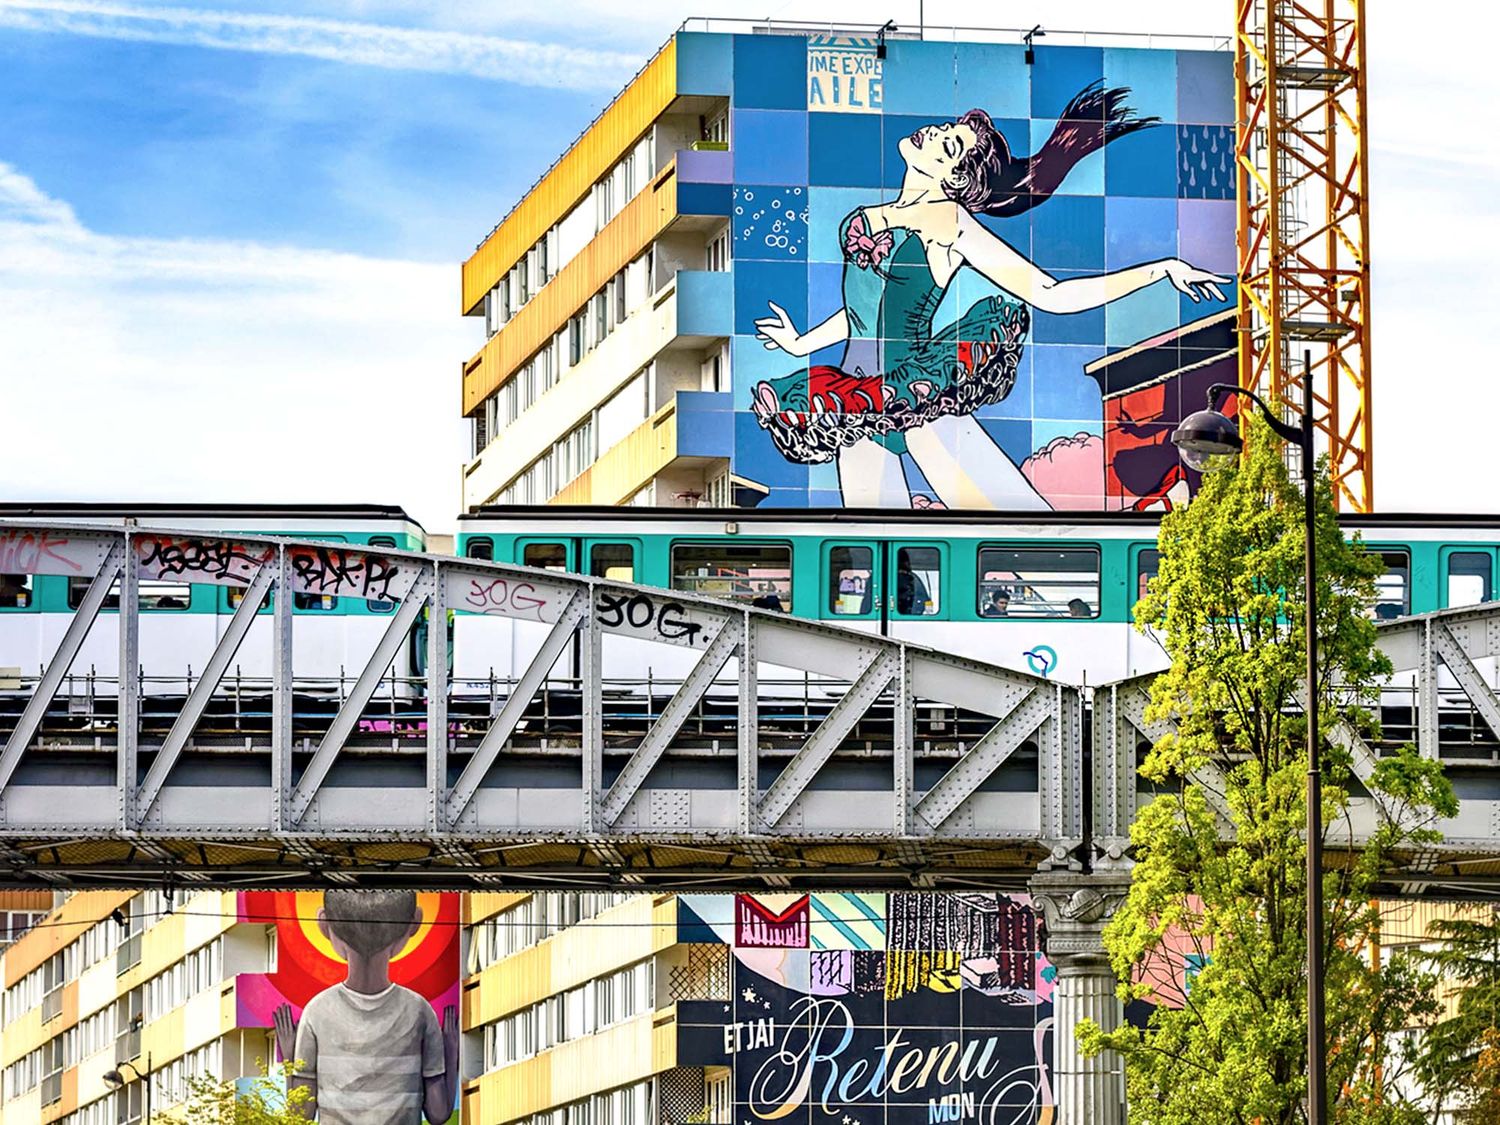 A true open-air museum, the project Boulevard Paris 13 has allowed the implementation of monumental murals by major artists in the heart of the 13th arrondissement of Paris (©B.Hogues).